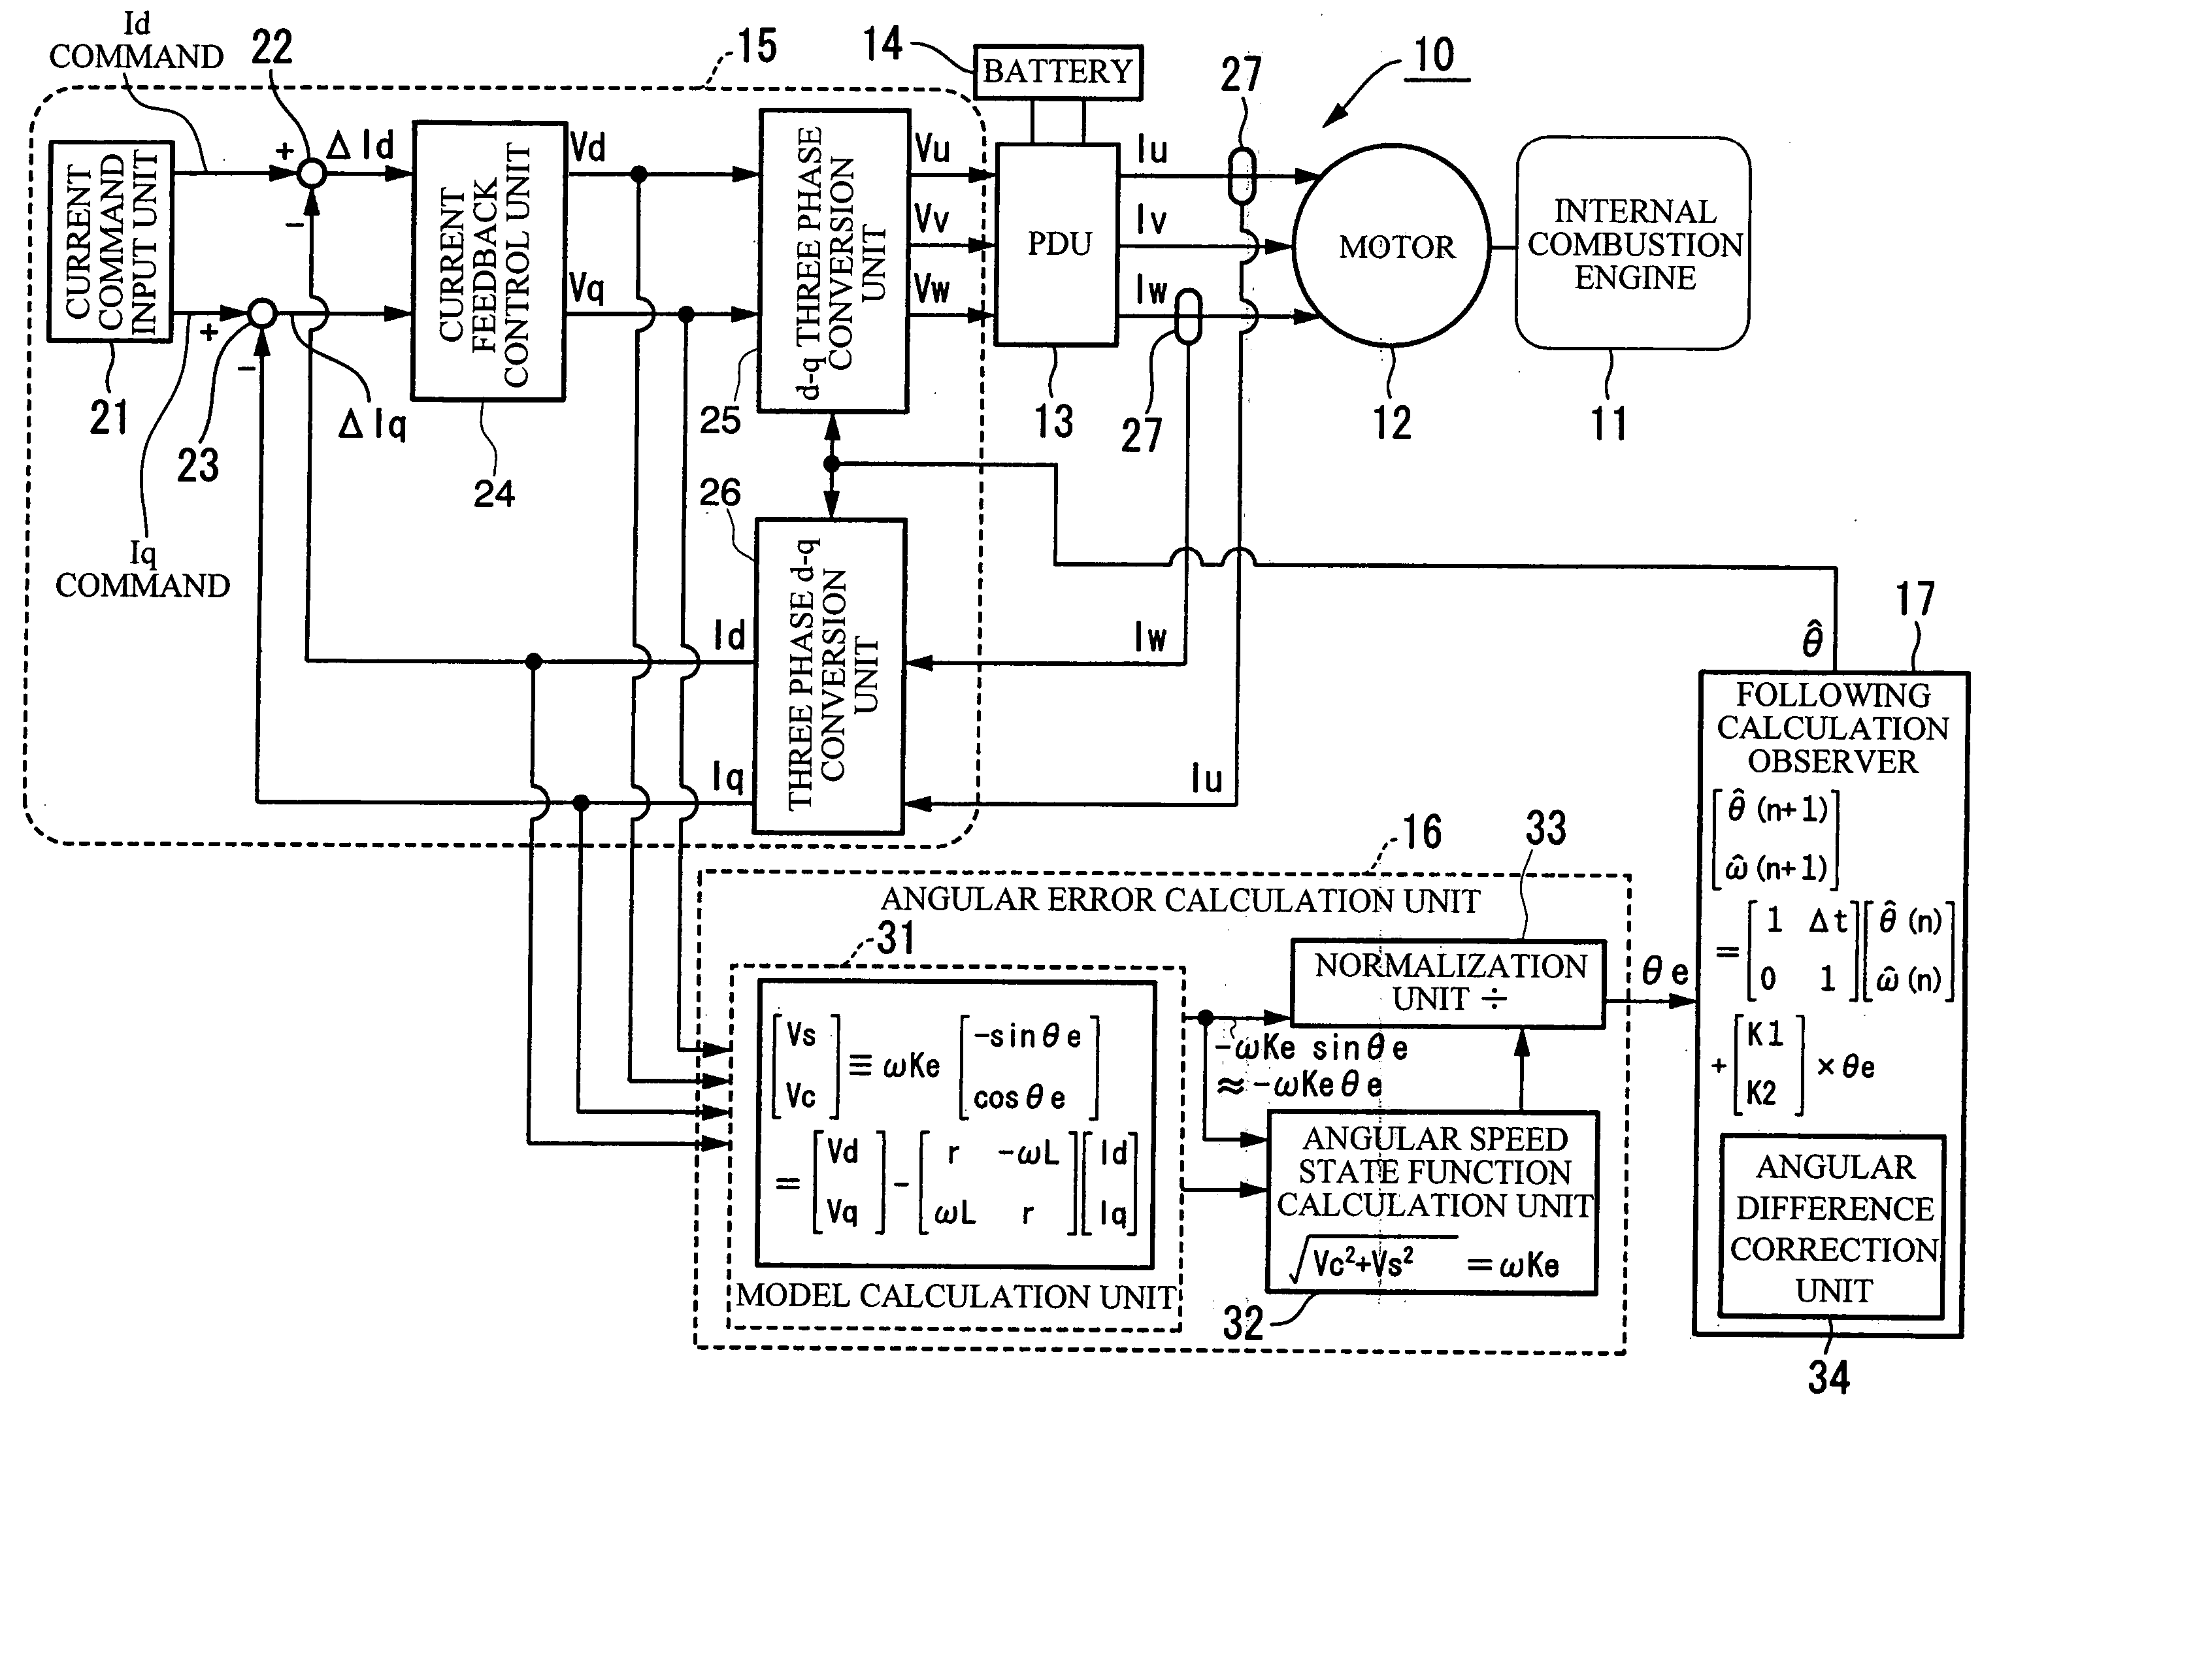 Control apparatus for brushless DC motor